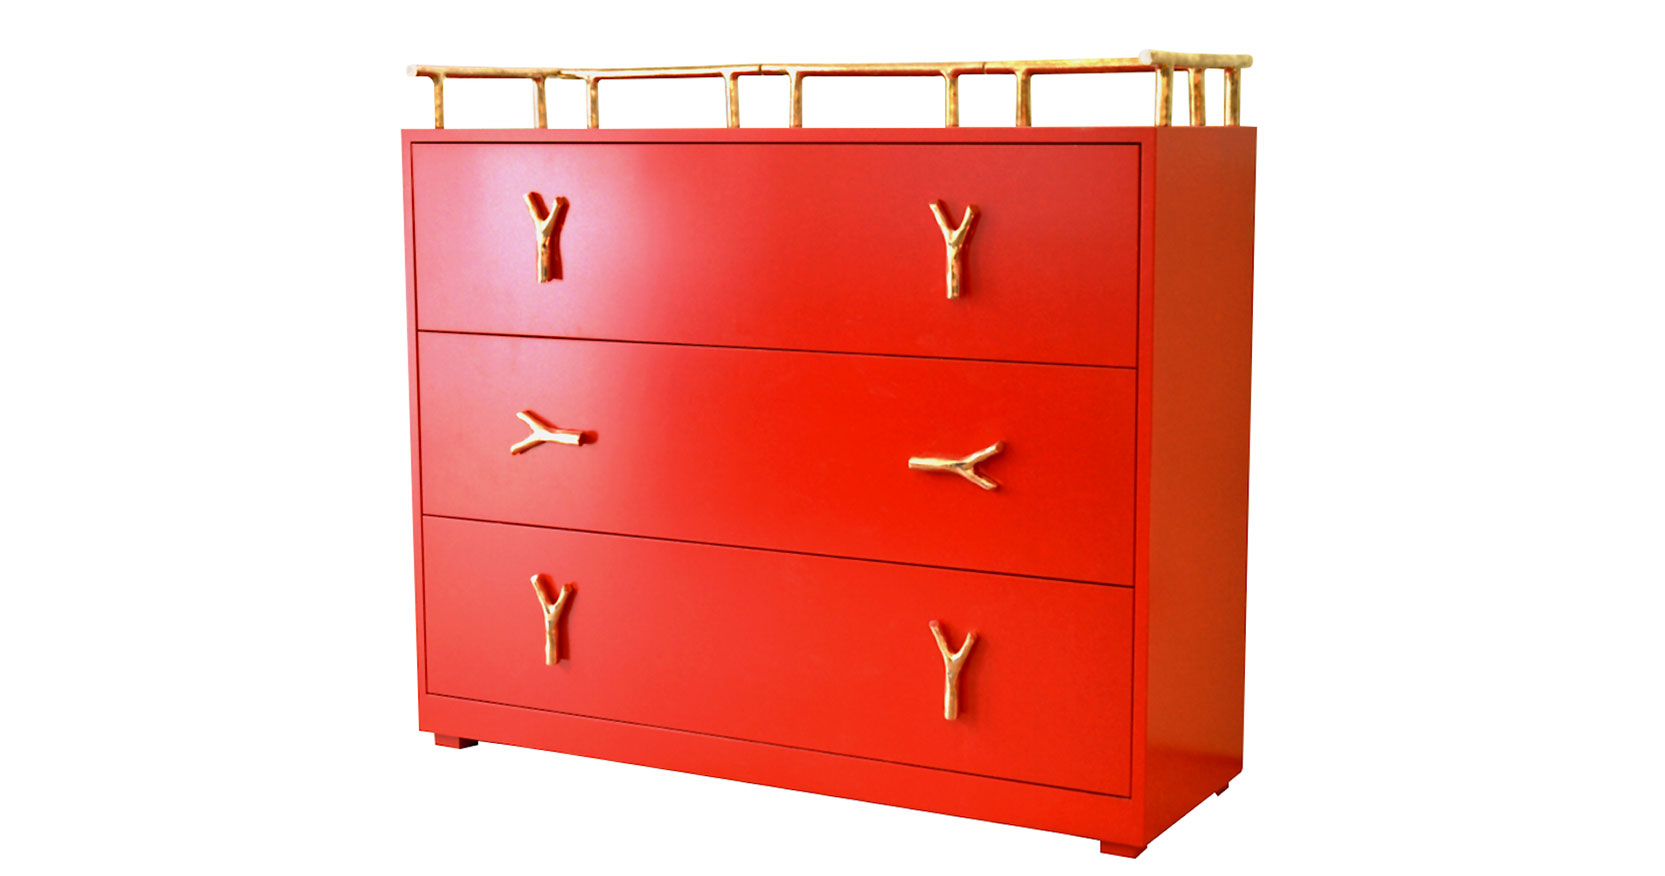 Garouste Bonetti, large baroque red lacquered rectangular chest of drawers, 3 drawers each with two golden handles in the shape of forks, on the top, surrounded by 5 rails in gilded bronze